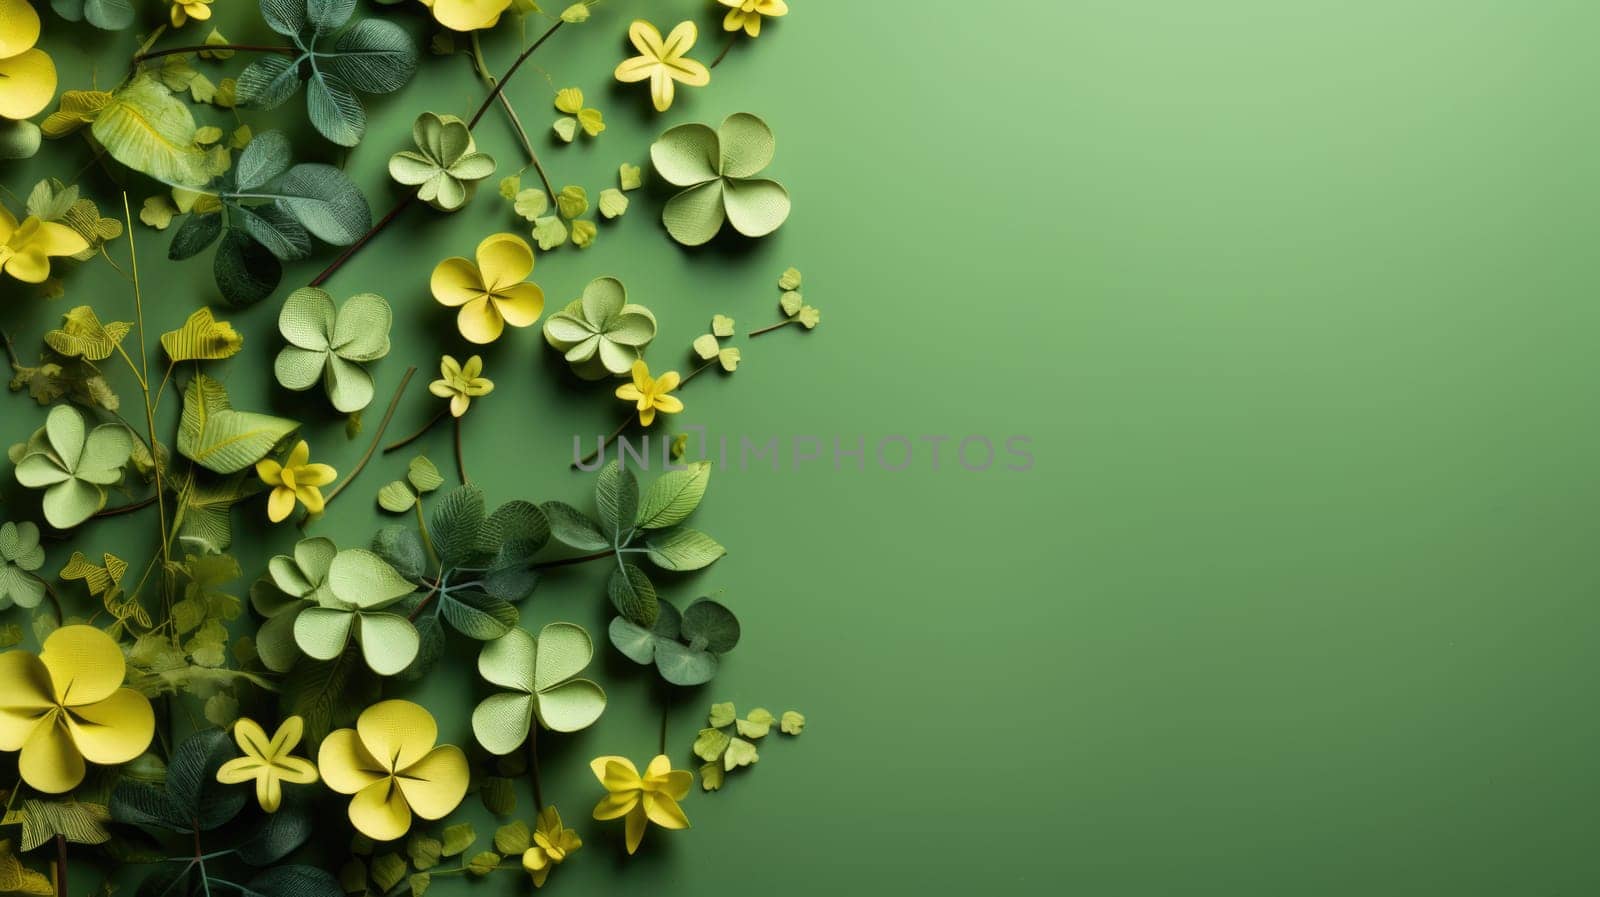 A wall covered in lush greenery is brightened by beautiful yellow flowers in full bloom.